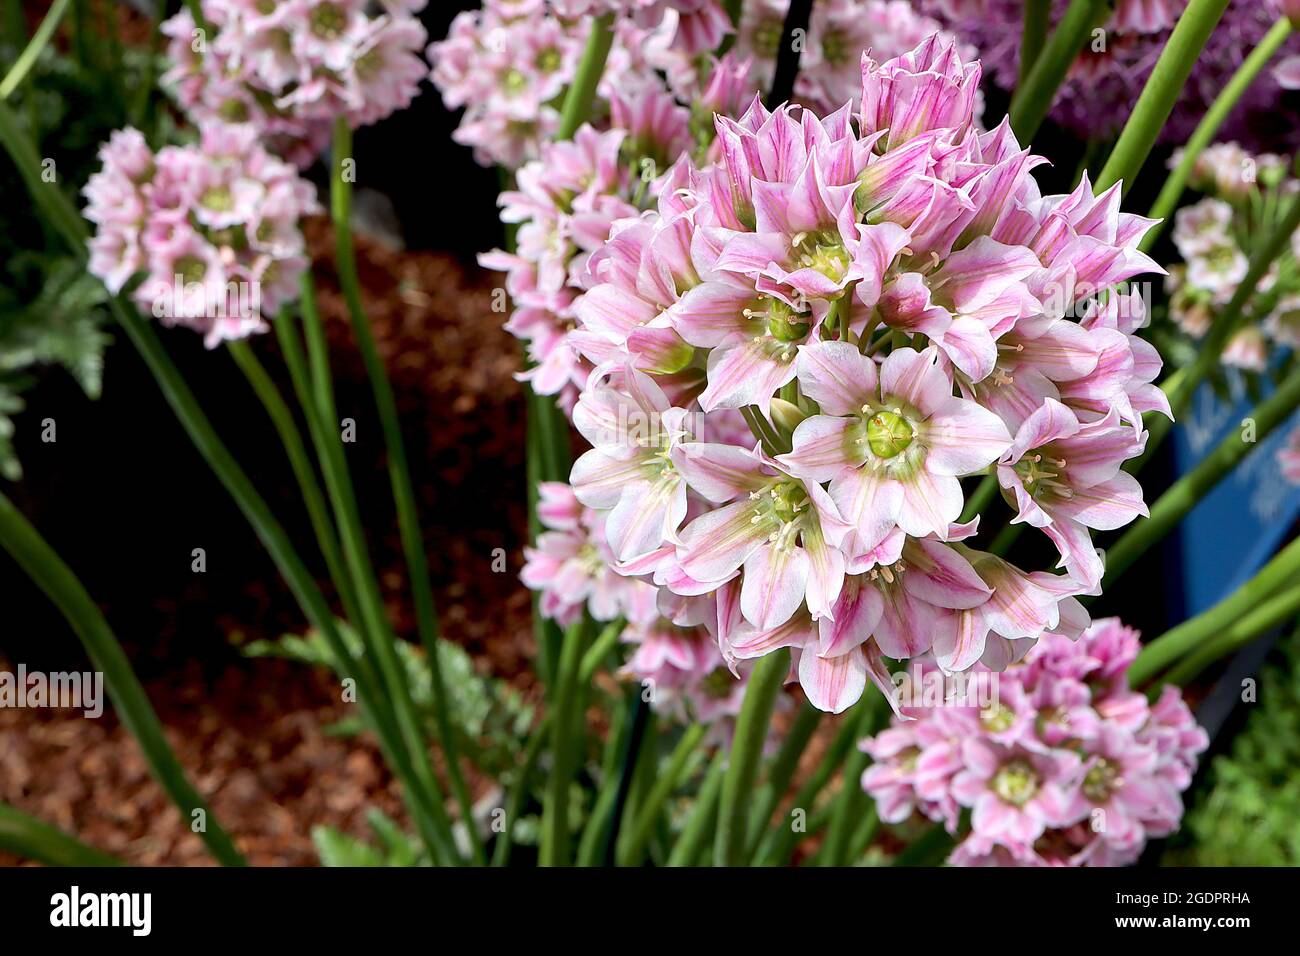 Allium tripedale  Nectaroscordum Tripedale – spherical cluster of white bell-shaped flowers with pink markings on tall thick stems,  July, England, UK Stock Photo